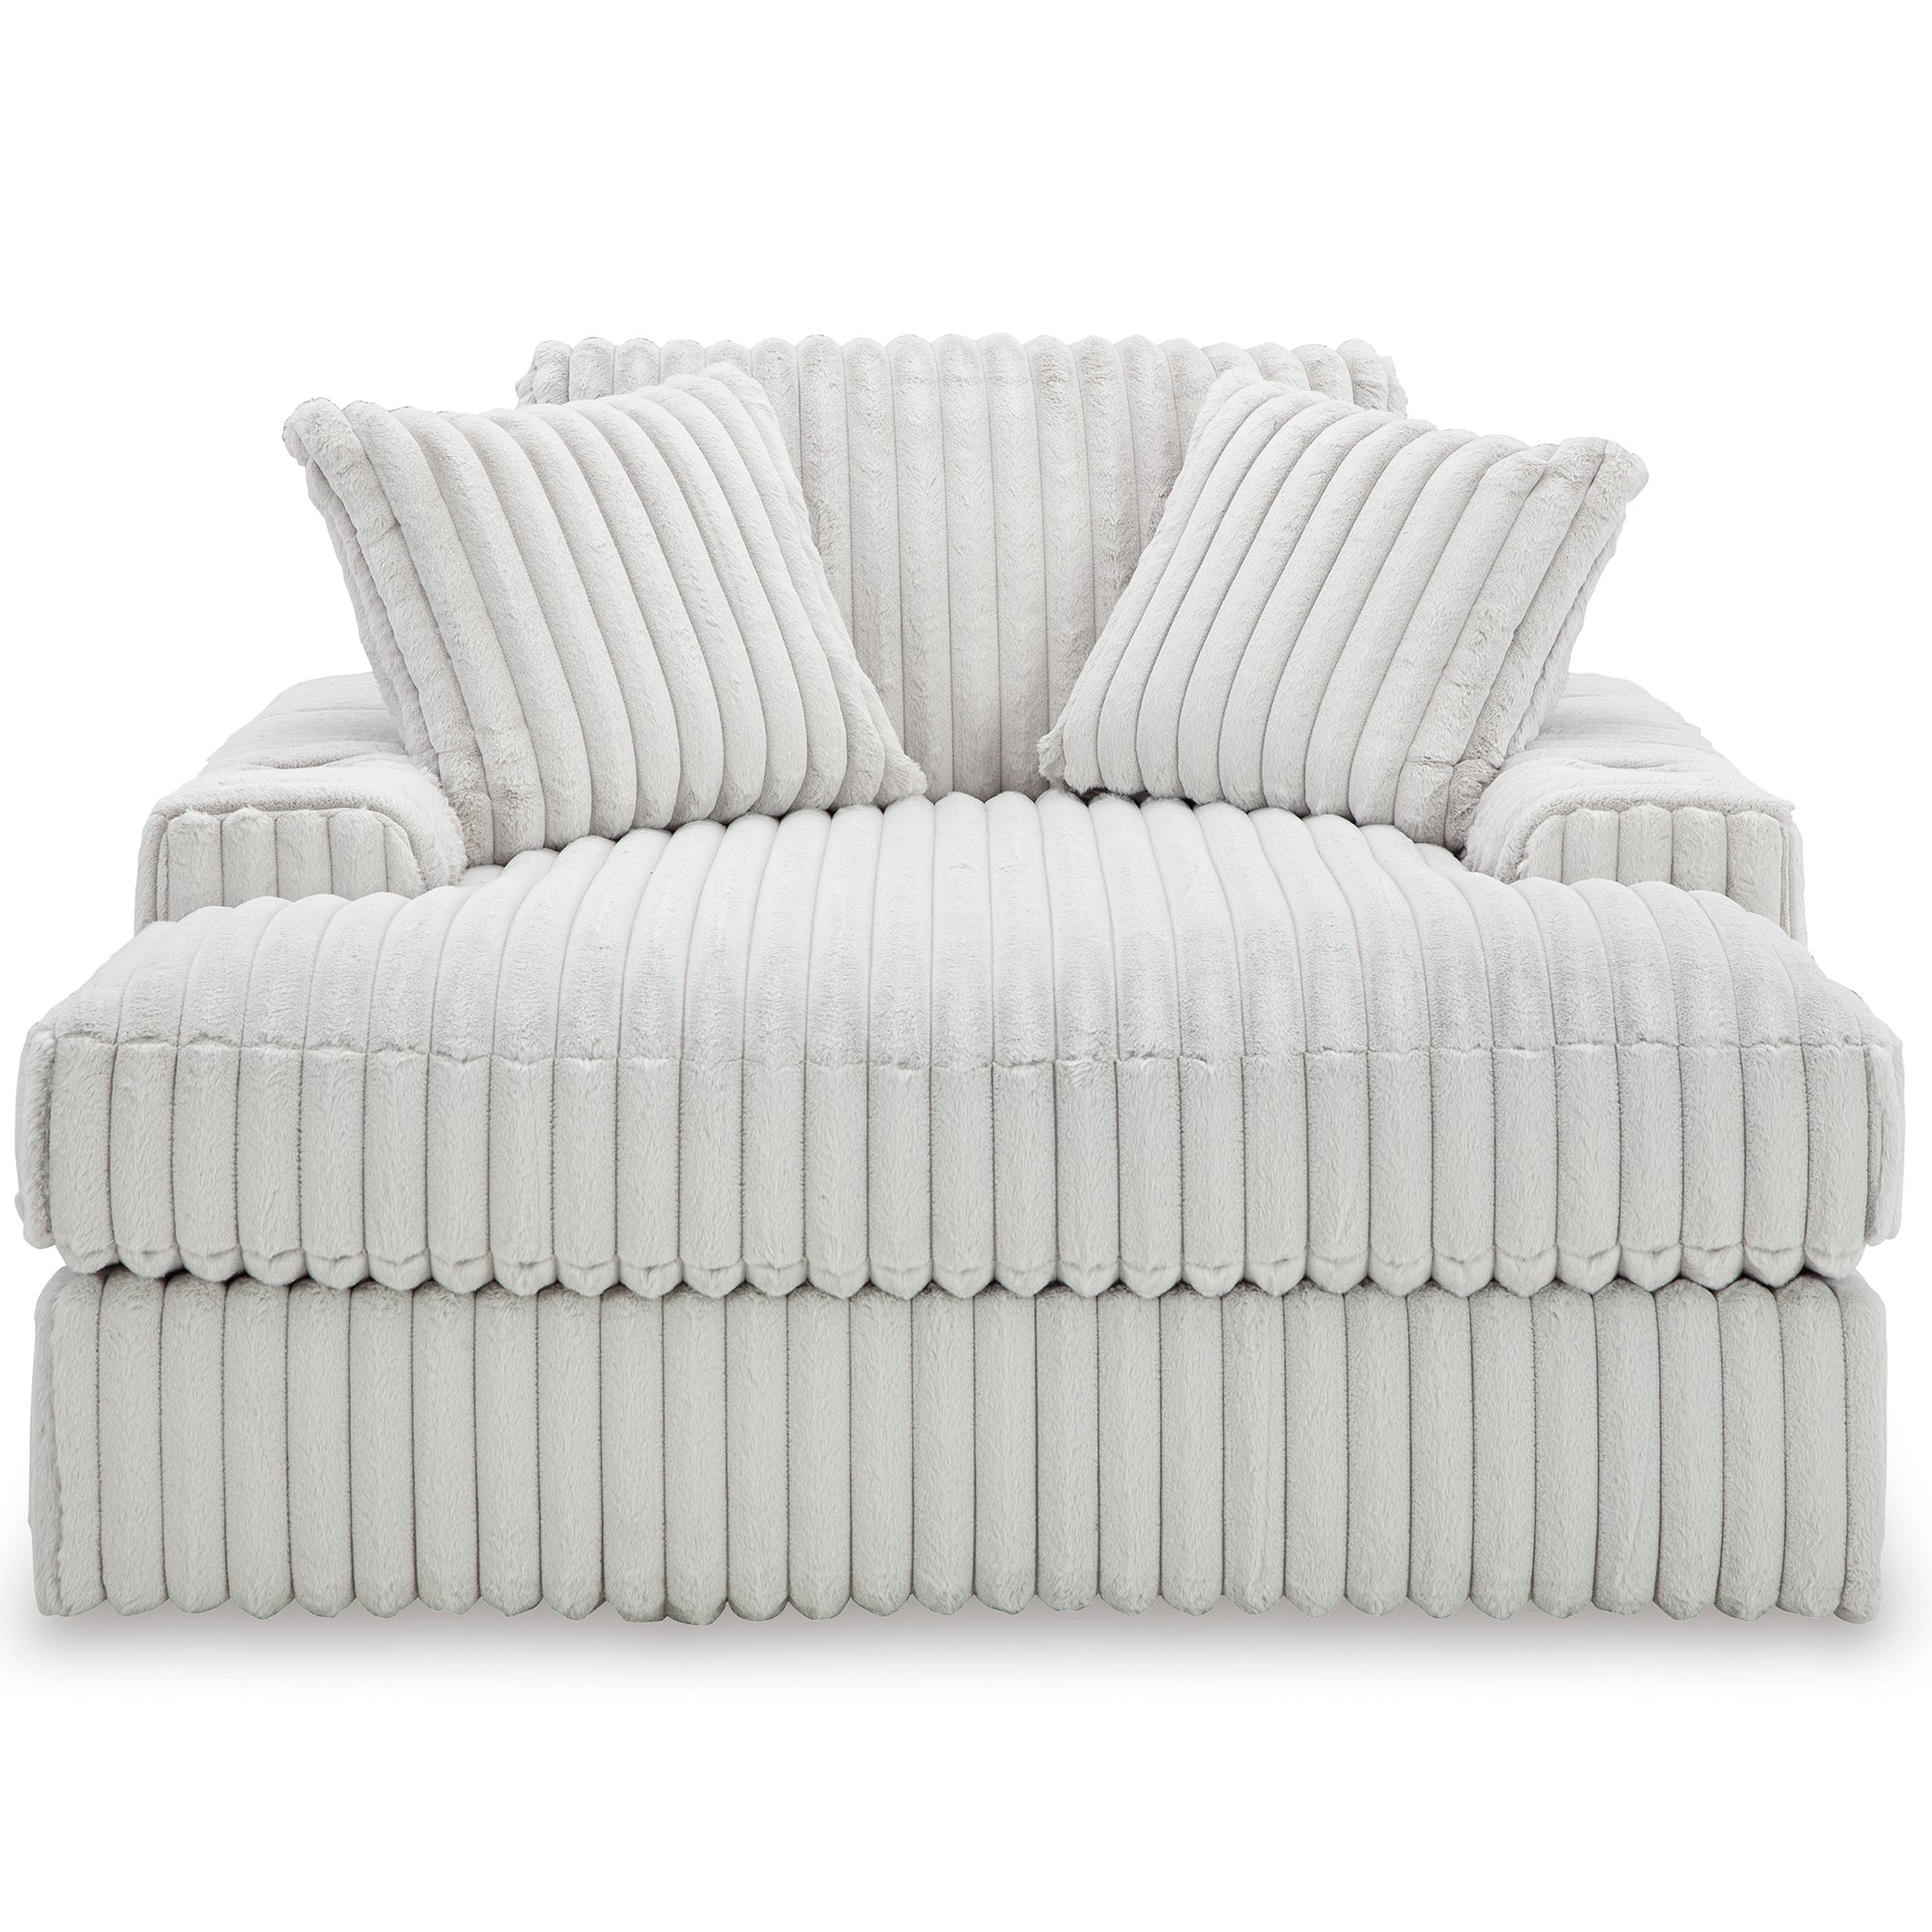 Chic and cozy Stupendous Oversized Chaise, combines bold character with sink-in softness for exceptional lounging